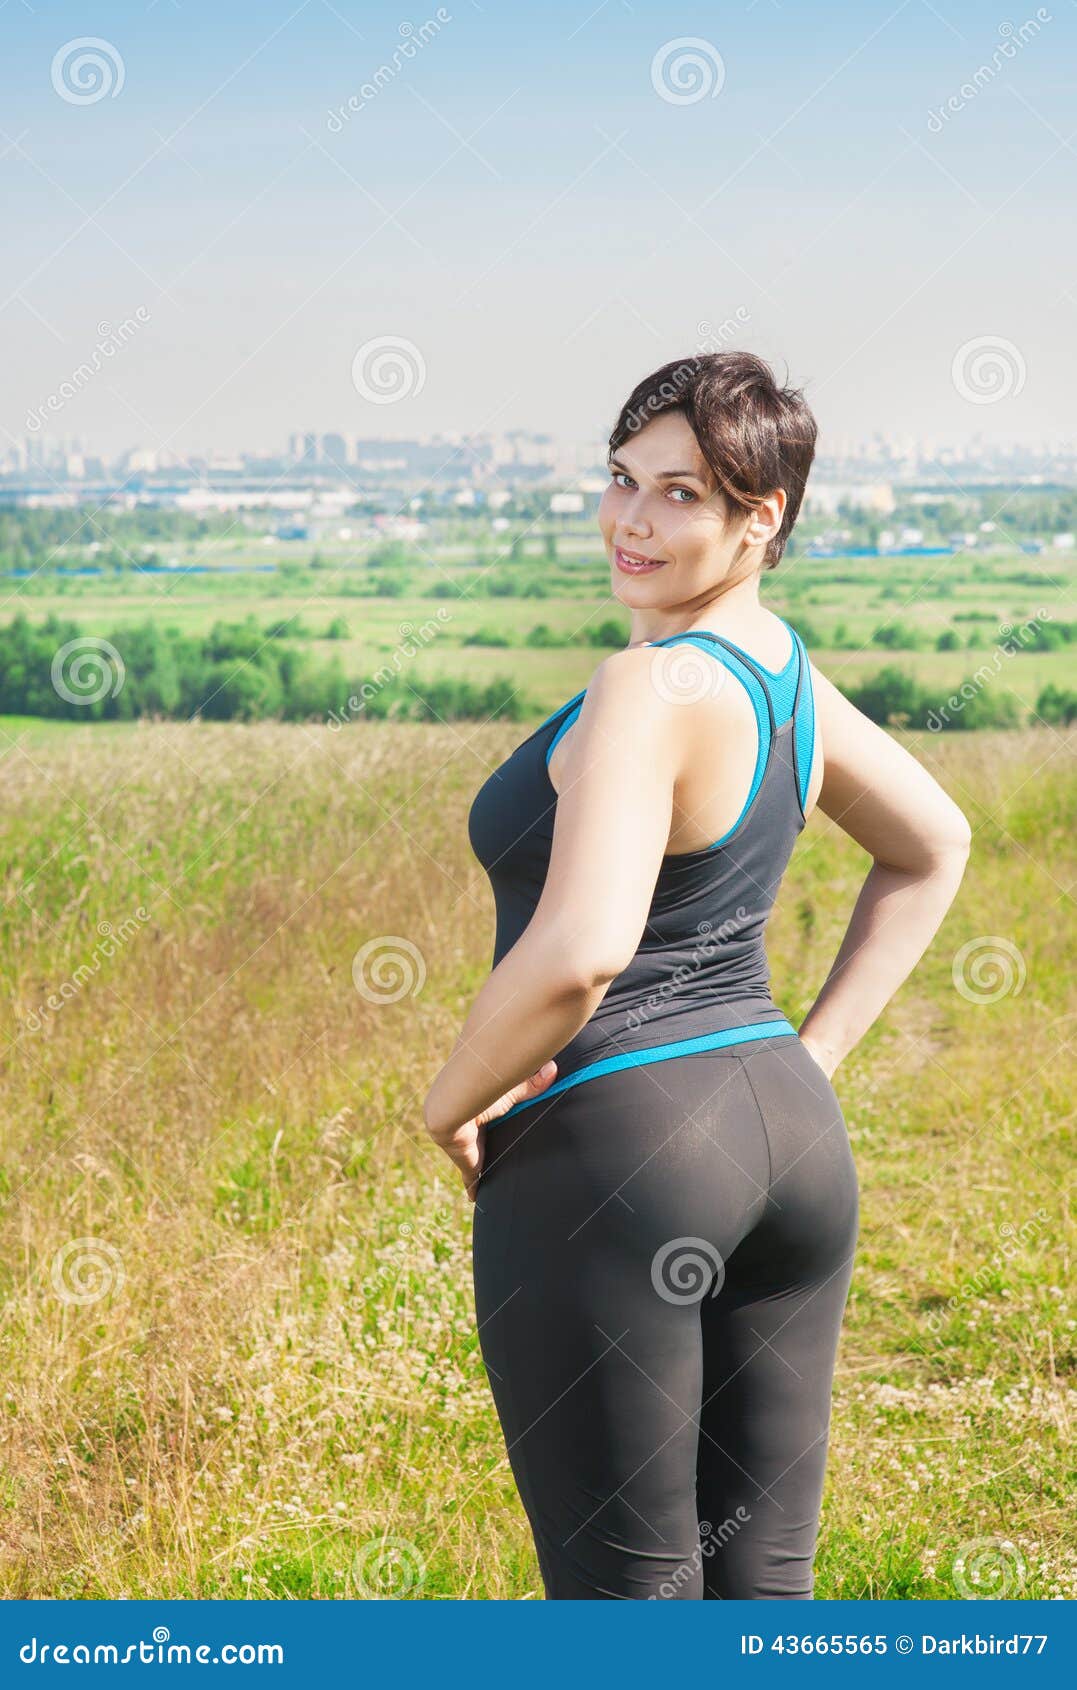 Fitness Plus Size Woman Outdoor Image - Image of loss, healthy: 43665565